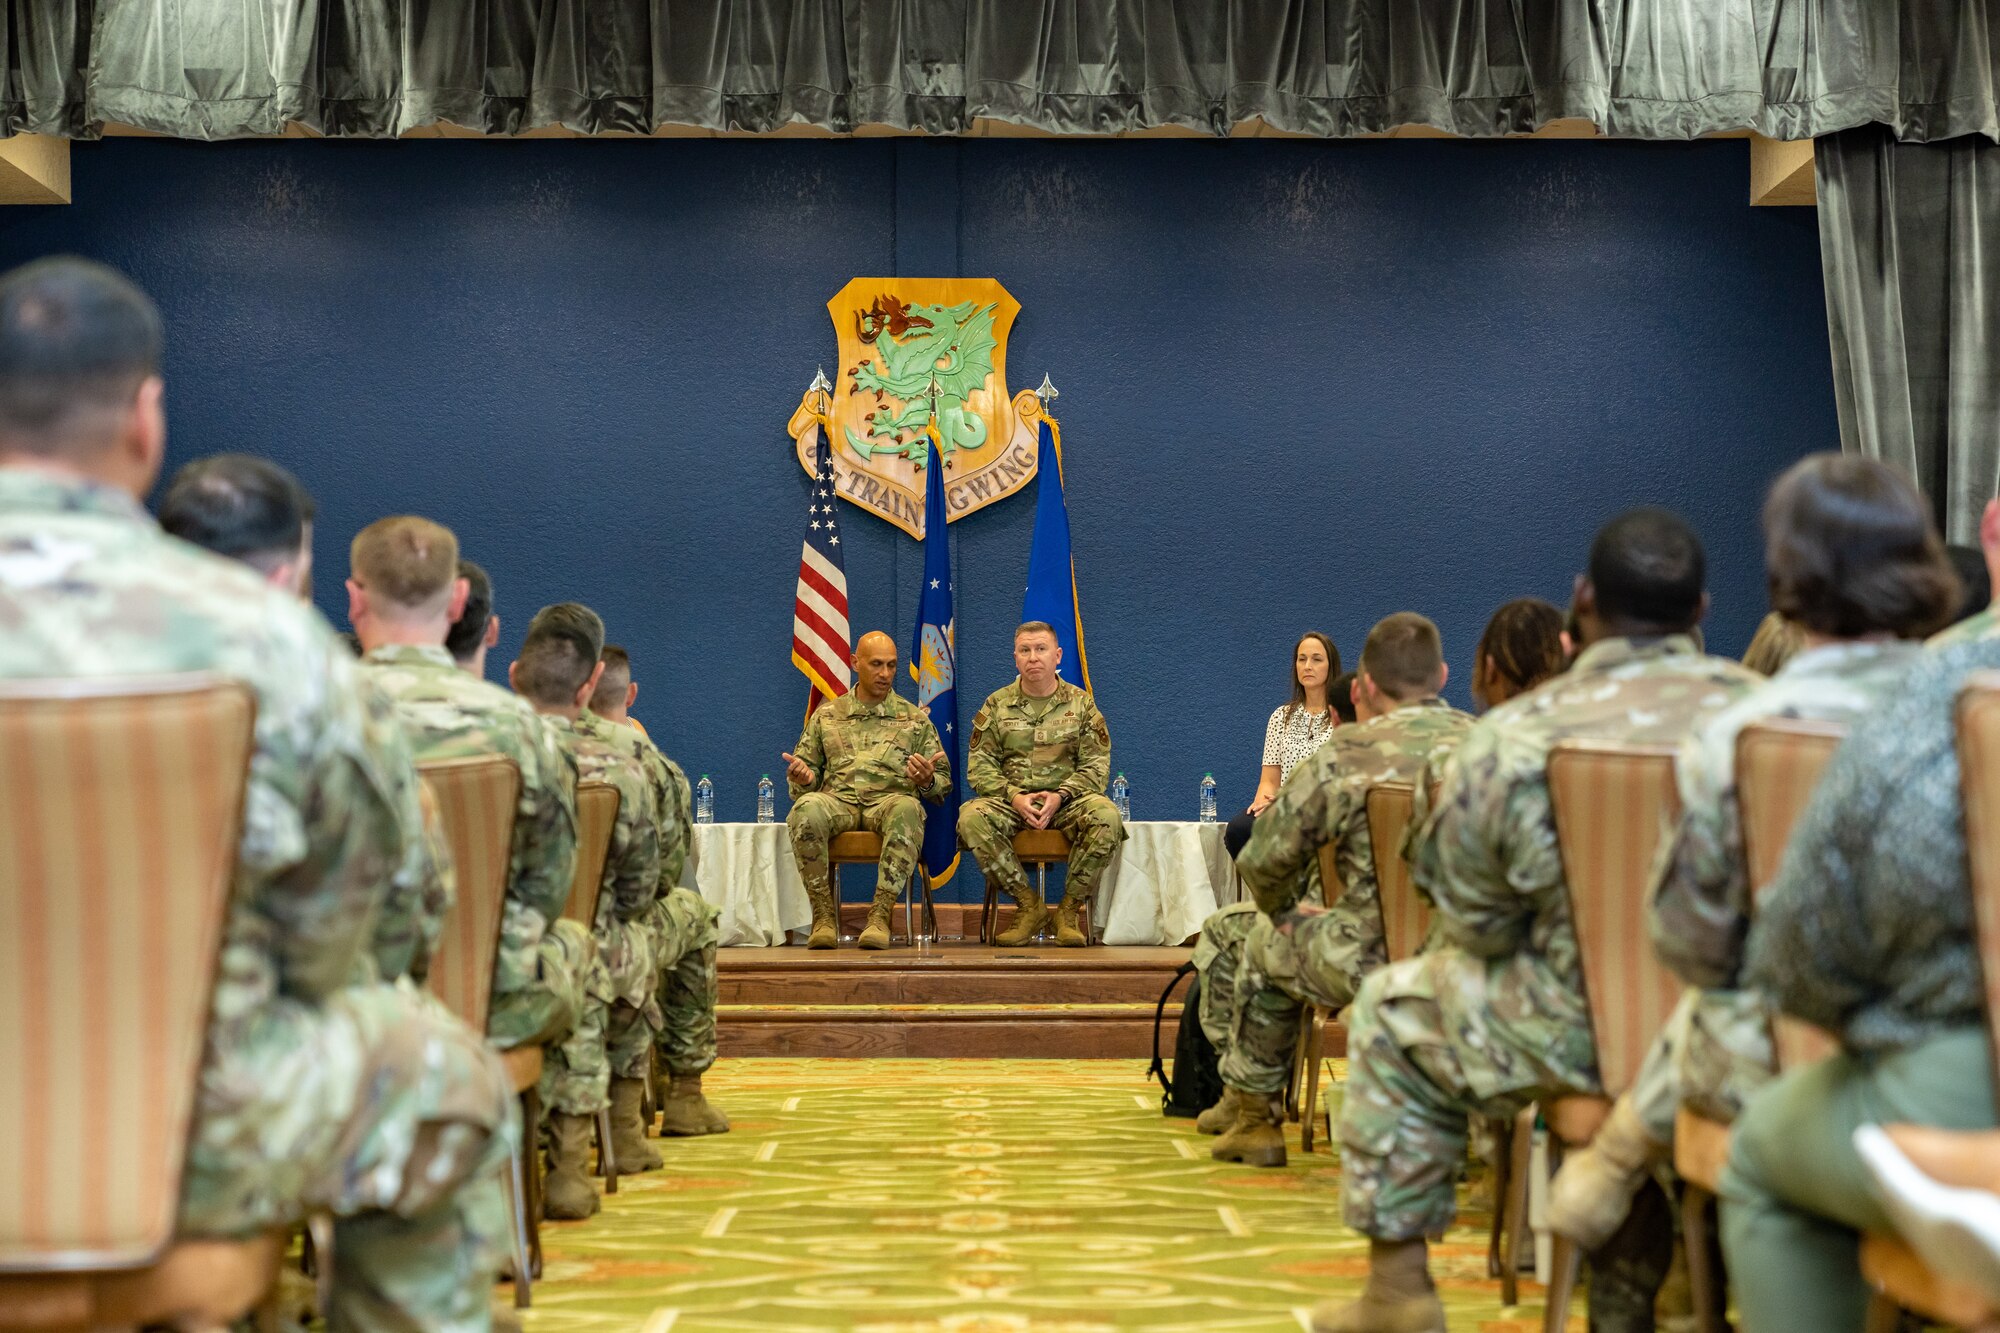 U.S. Air Force Lt. Gen. Brian Robinson, Air Education and Training Command, commander, and Chief Master Sgt. Chad Bickley, AETC command chief, host a leadership panel for the Airmen at Keesler Air Force Base, Mississippi